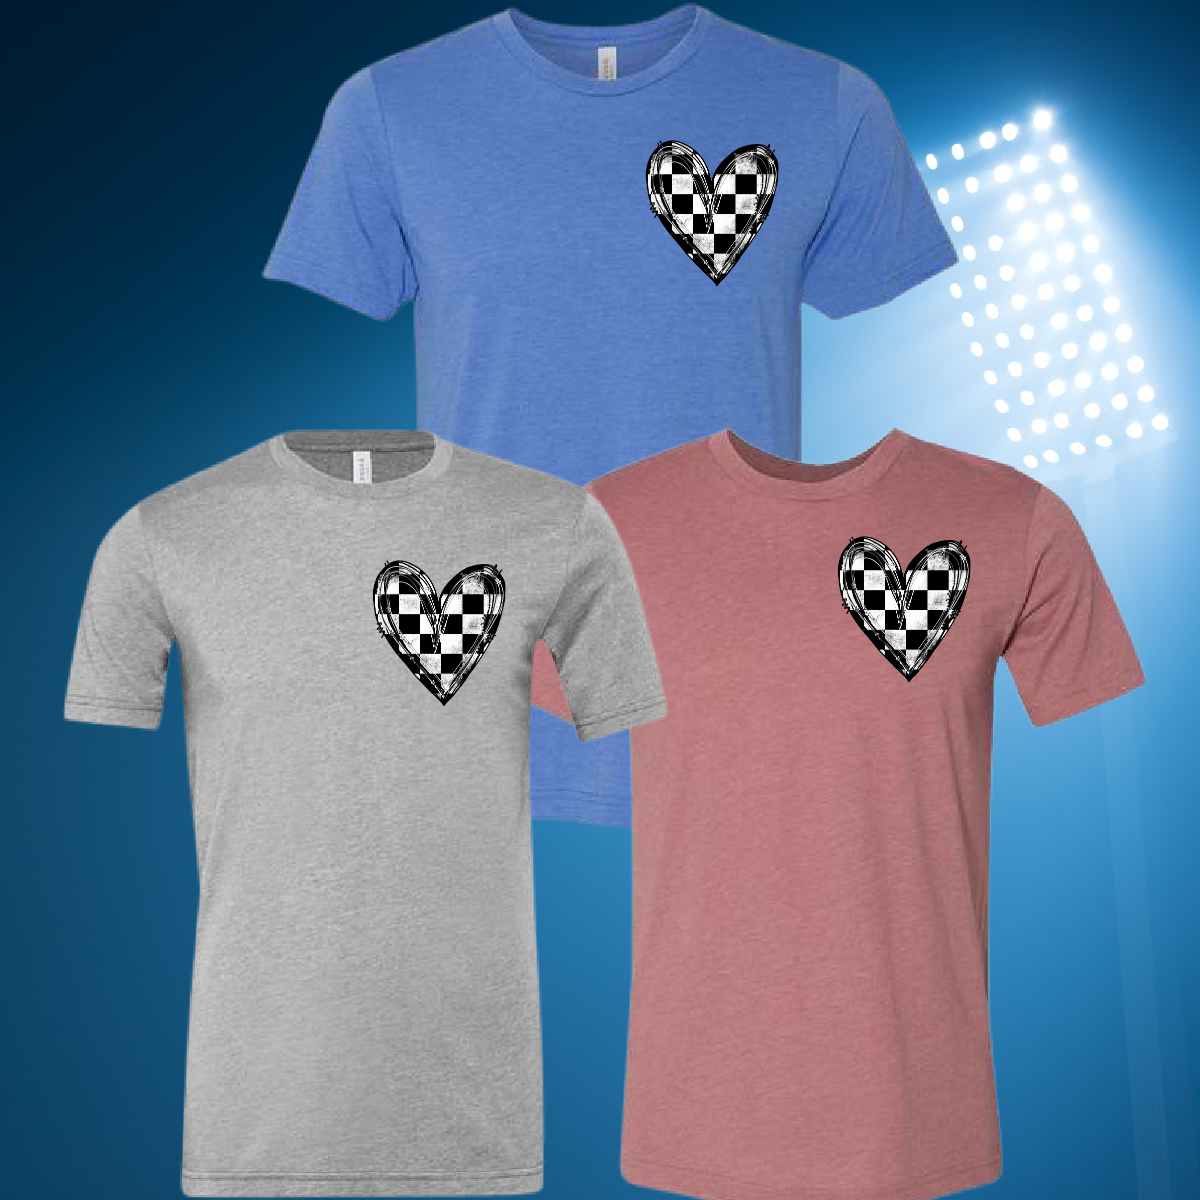 Racing Heart Oversized Pocket Logo - Only $12 with purchase!  (Use Code 12DOLLARDEAL)